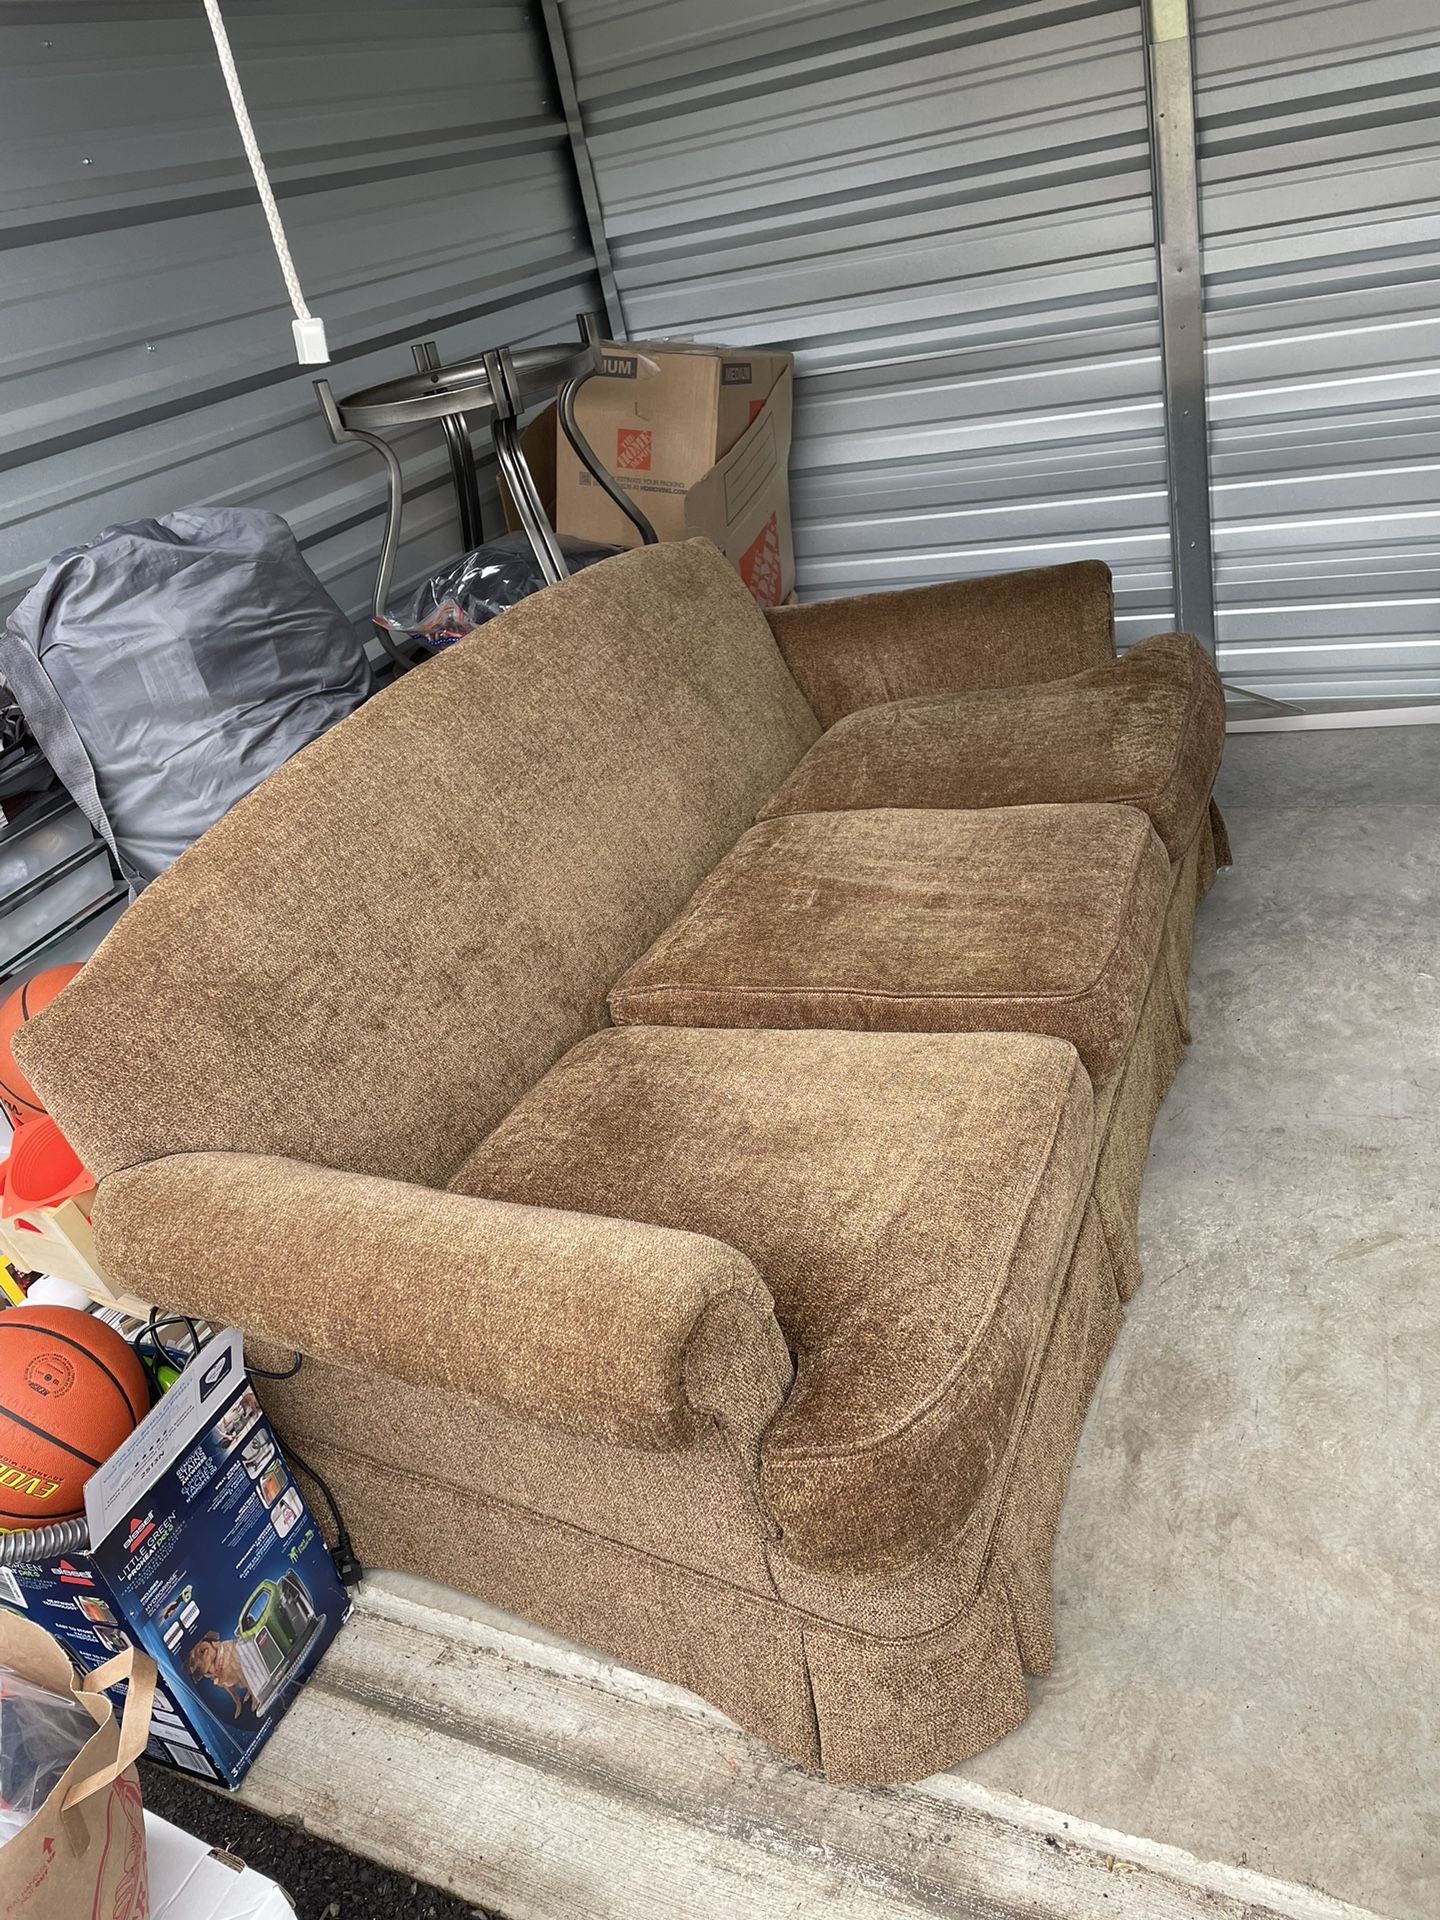 COUCH FOR SALE 